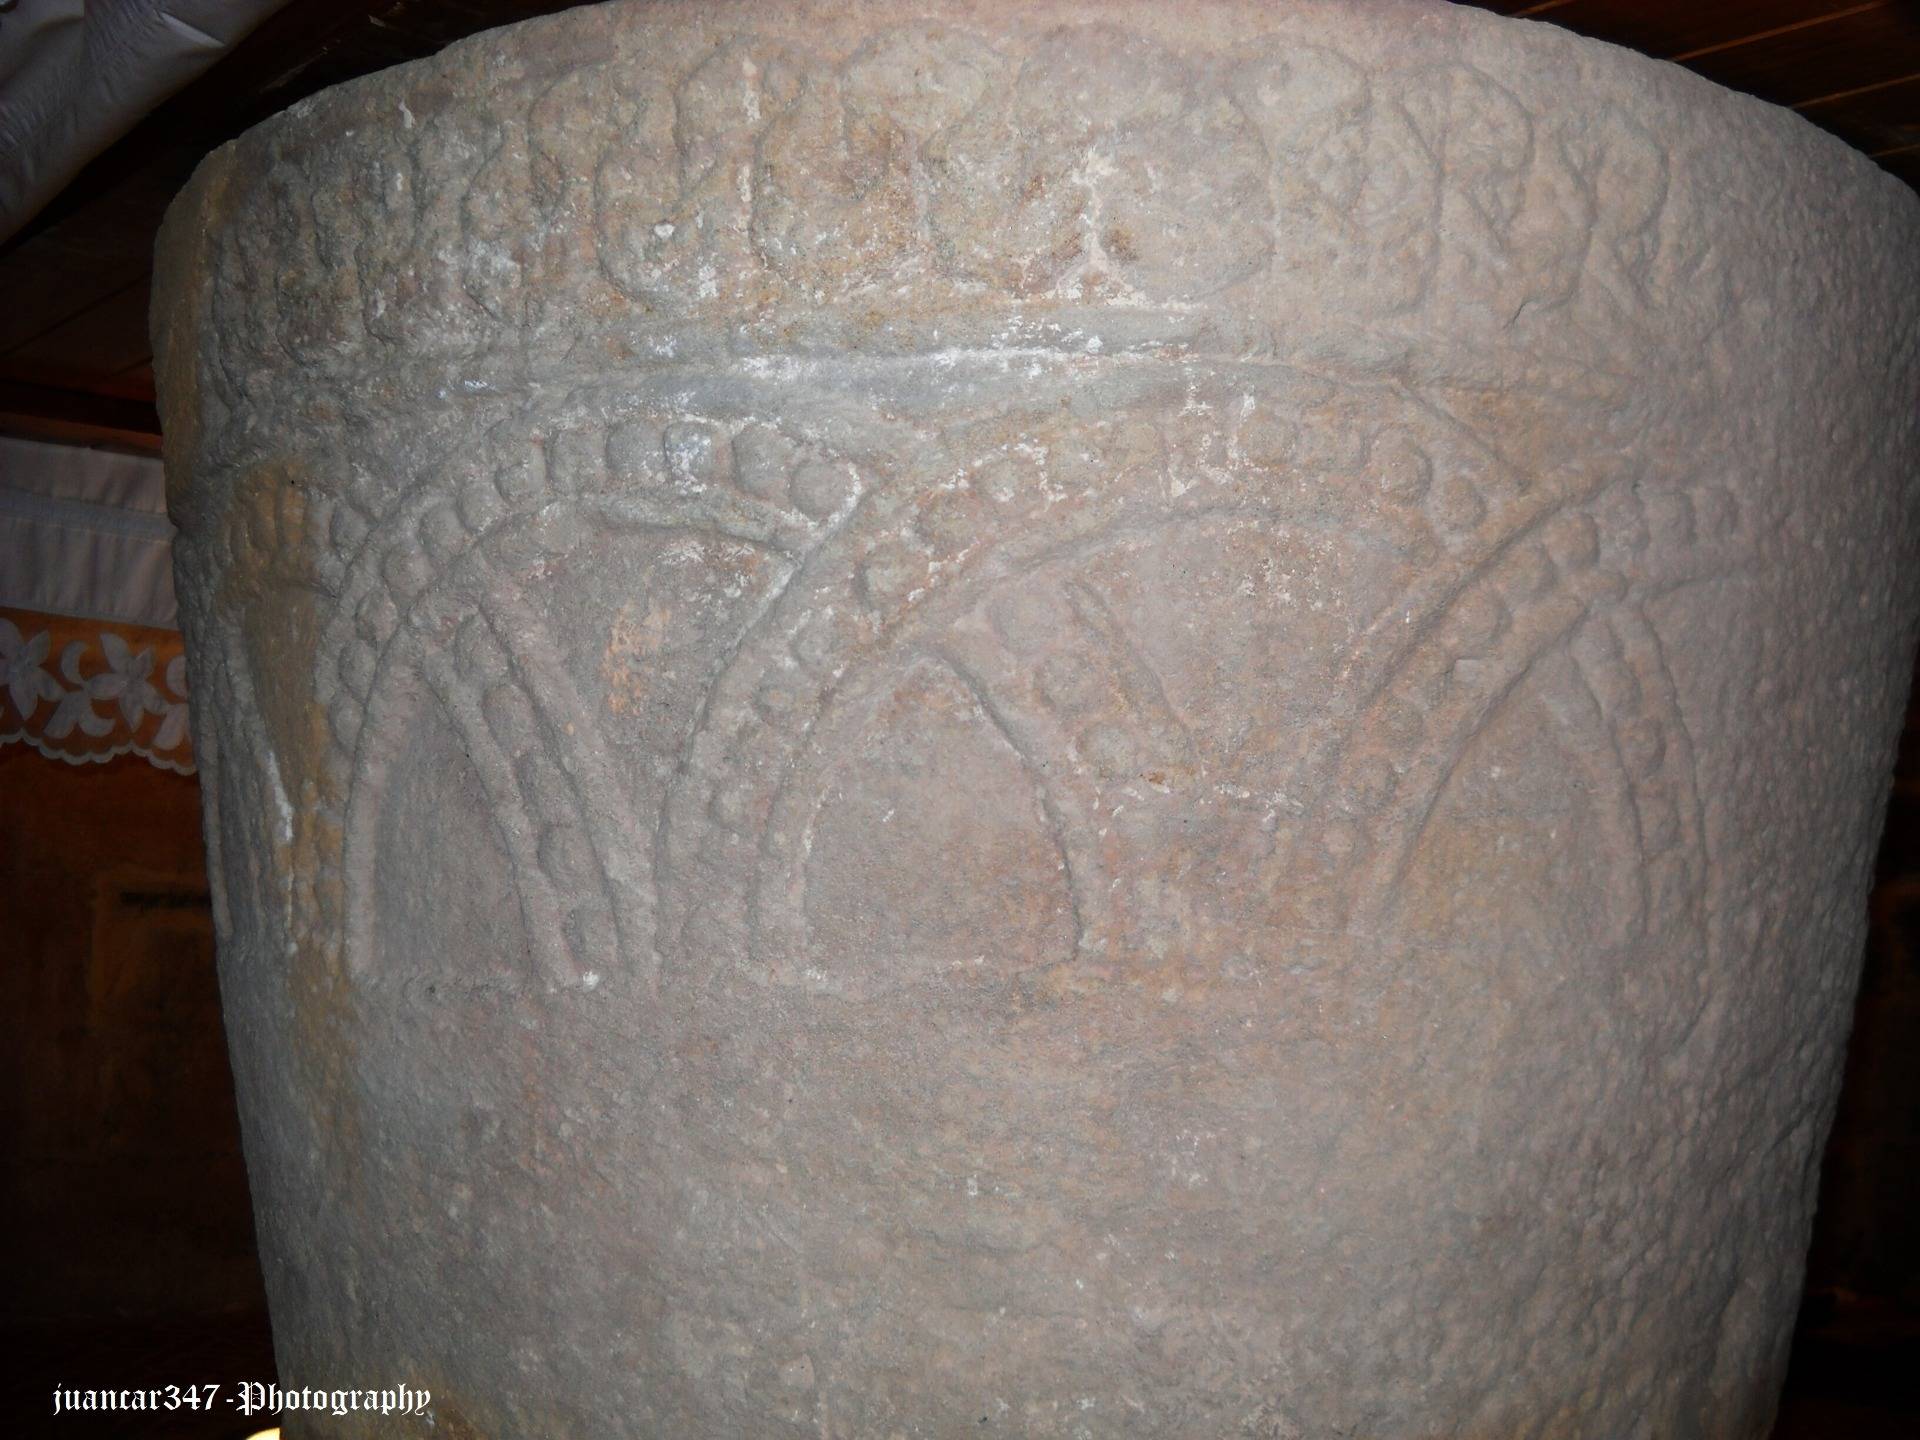 Romanesque baptismal font from the 12th century